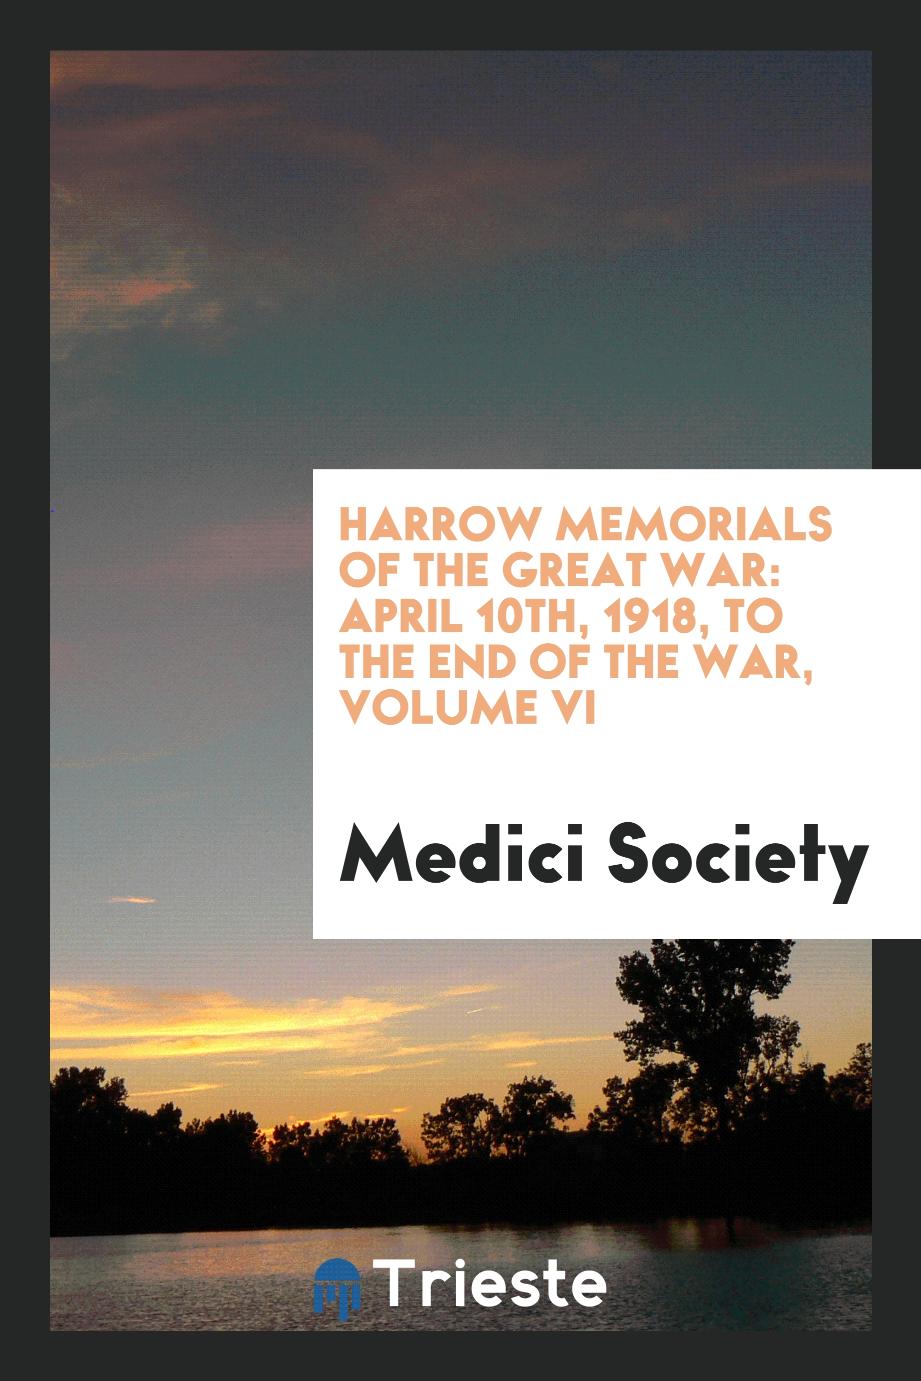 Harrow memorials of the great war: April 10th, 1918, to the end of the war, Volume VI